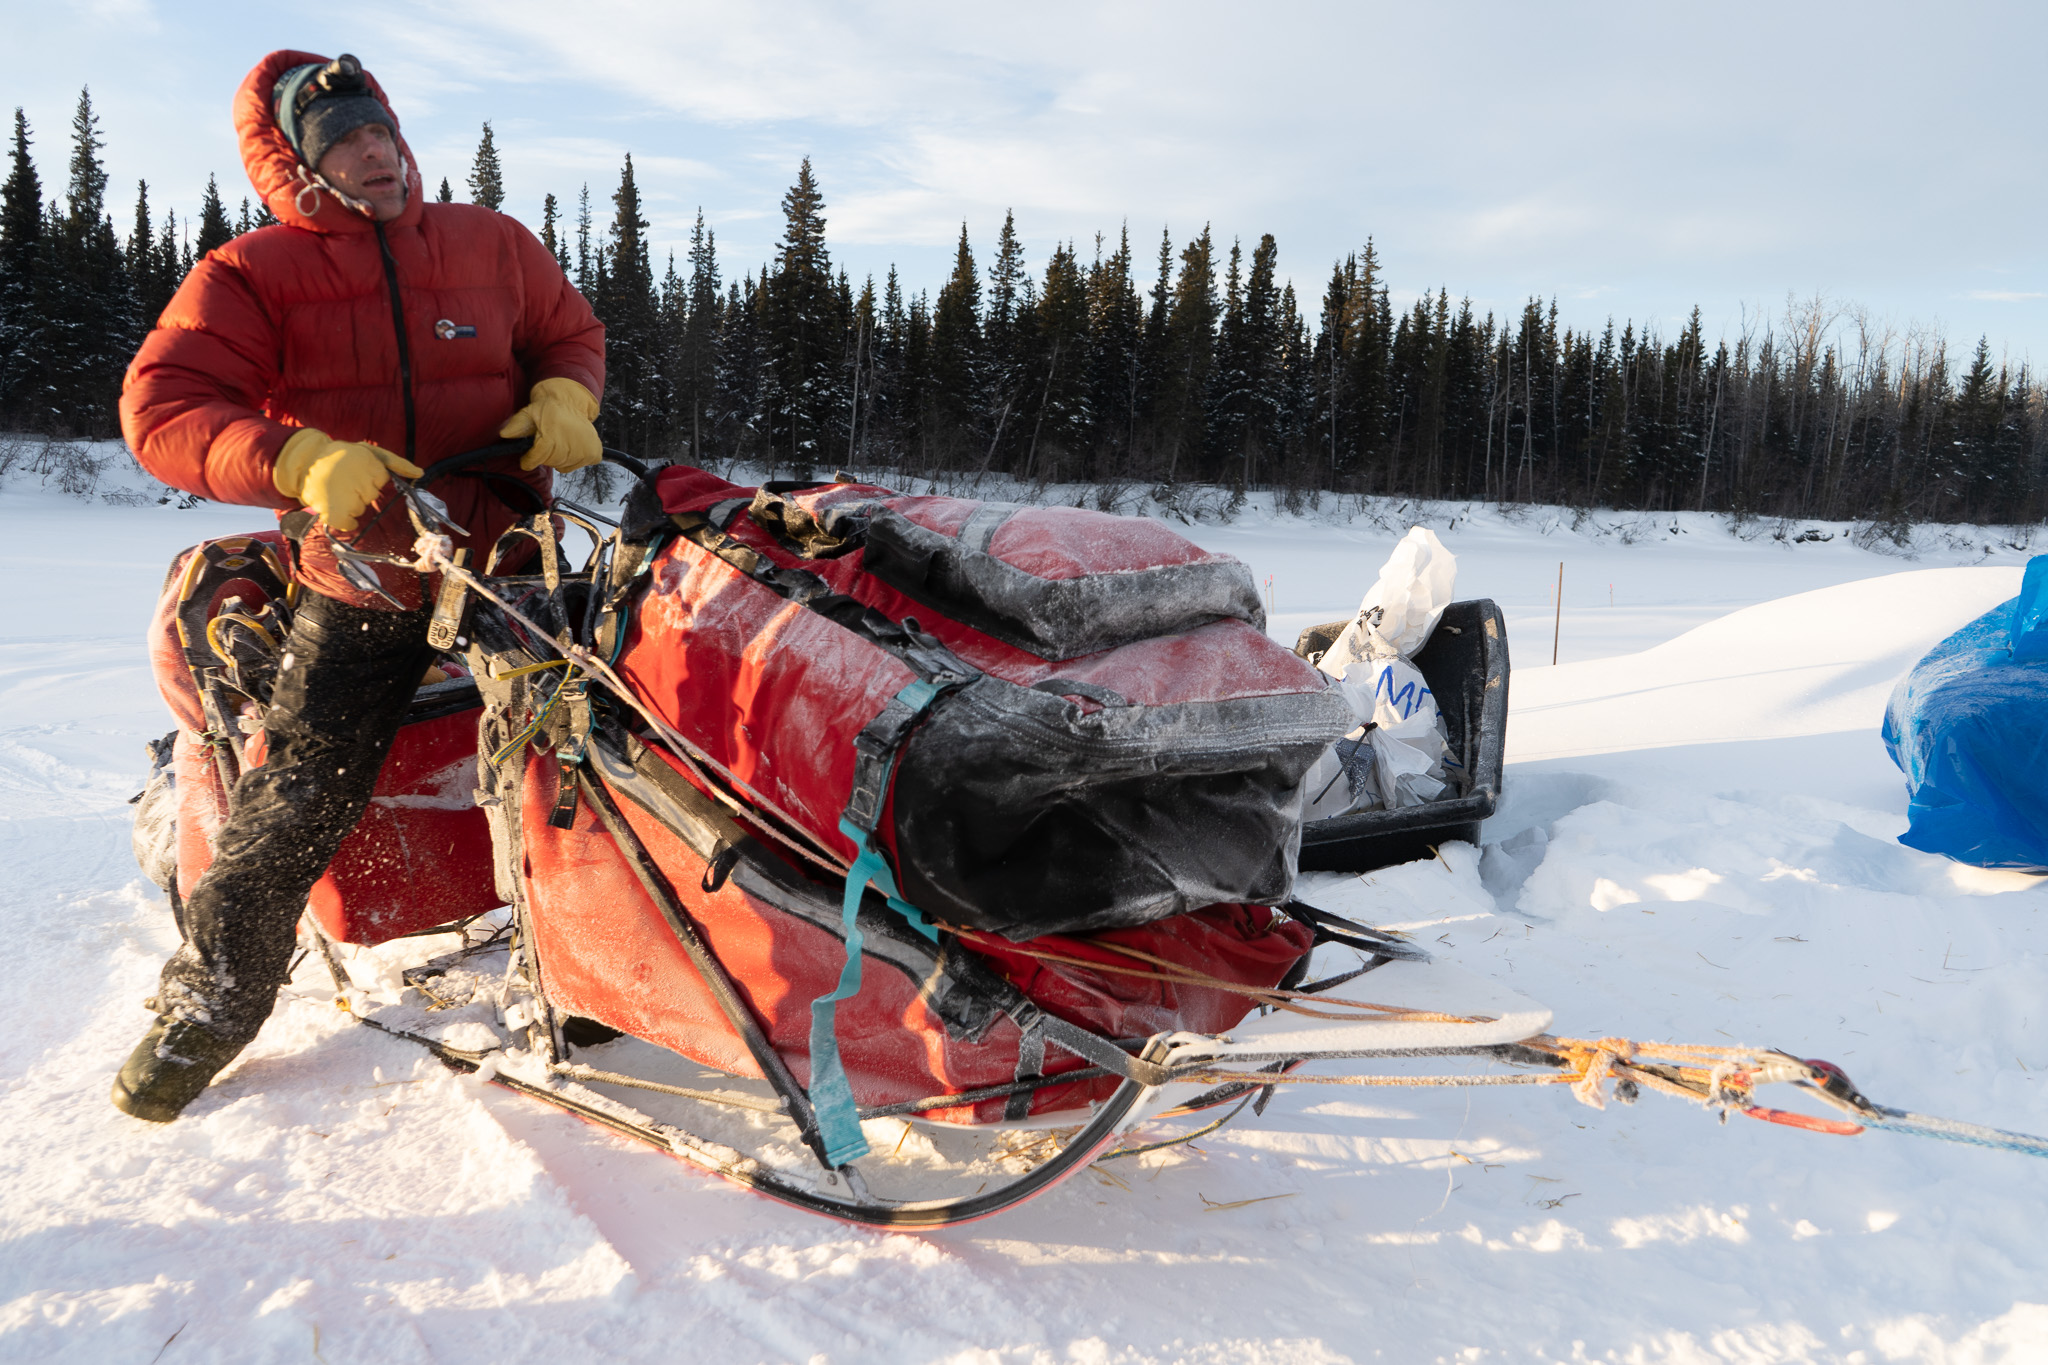 A musher in a red jacket pushes off his sled.